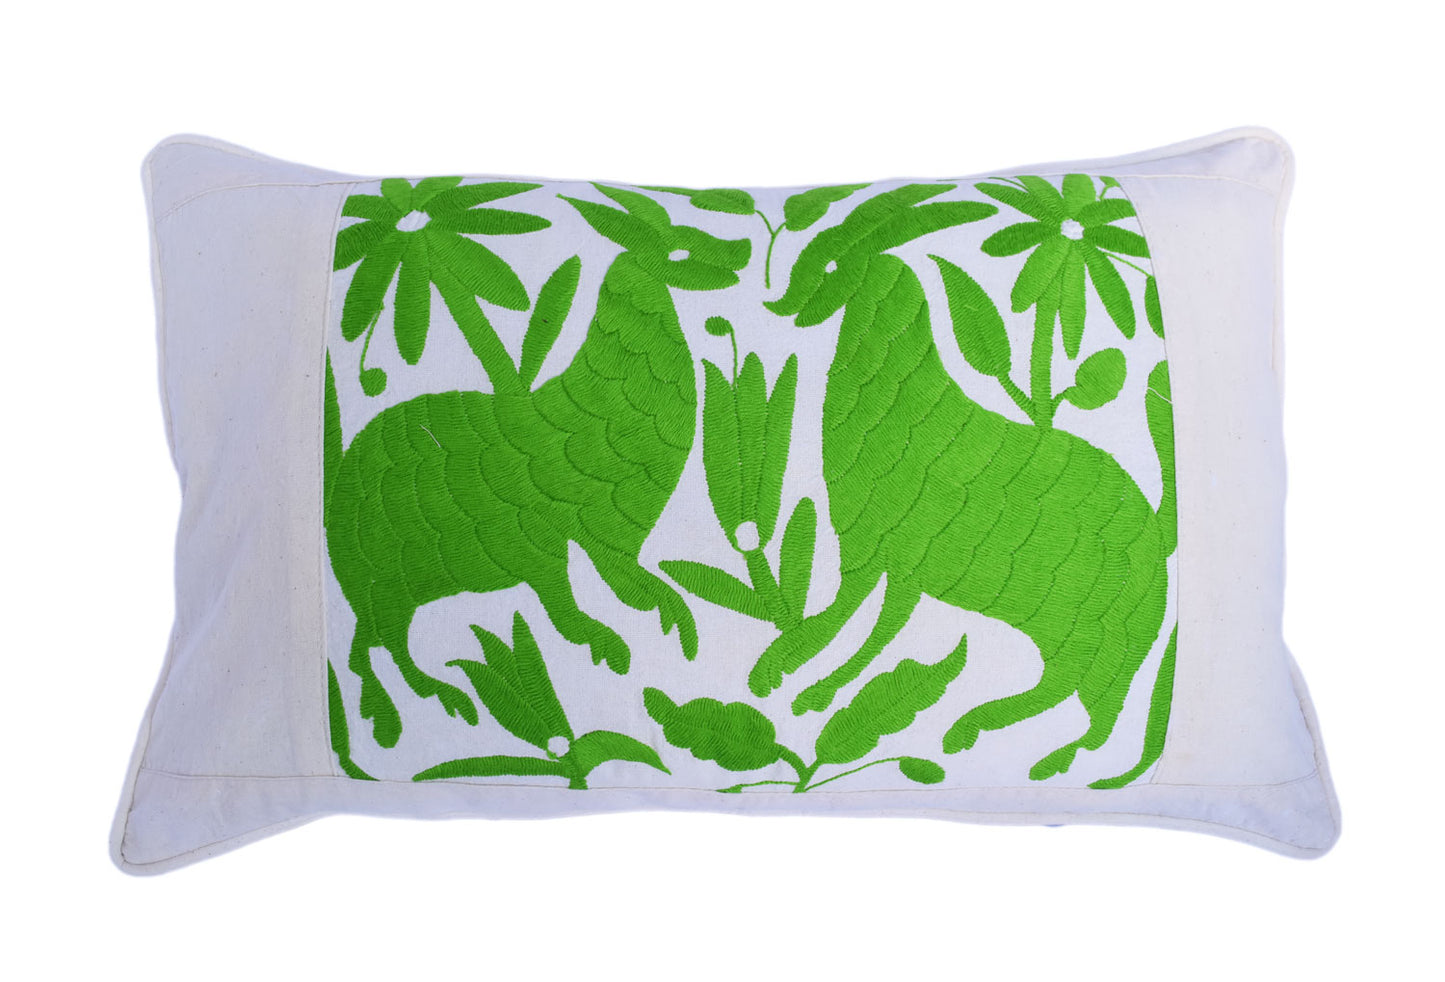 7 Otomi Cushion Covers 7 Friends Christmas Gifts Sorted! - Exquisitely Handmade by Mexican Artisans